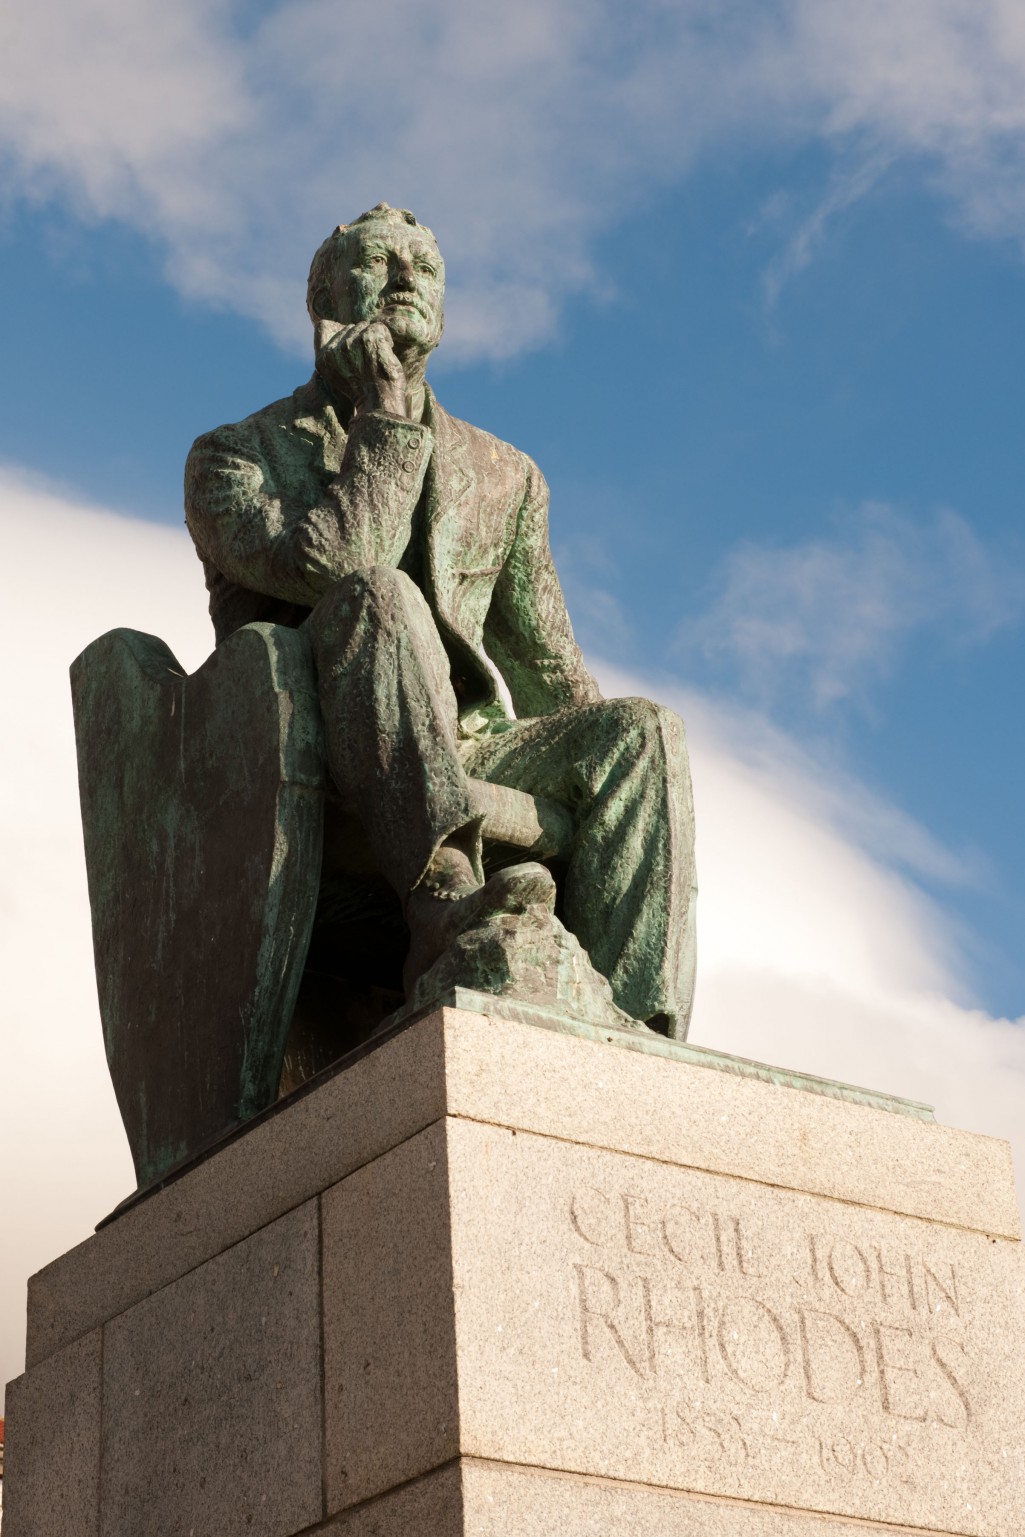 Statue of Cecil Rhodes at the University of Cape Town, erected in 1934 and removed in 2015